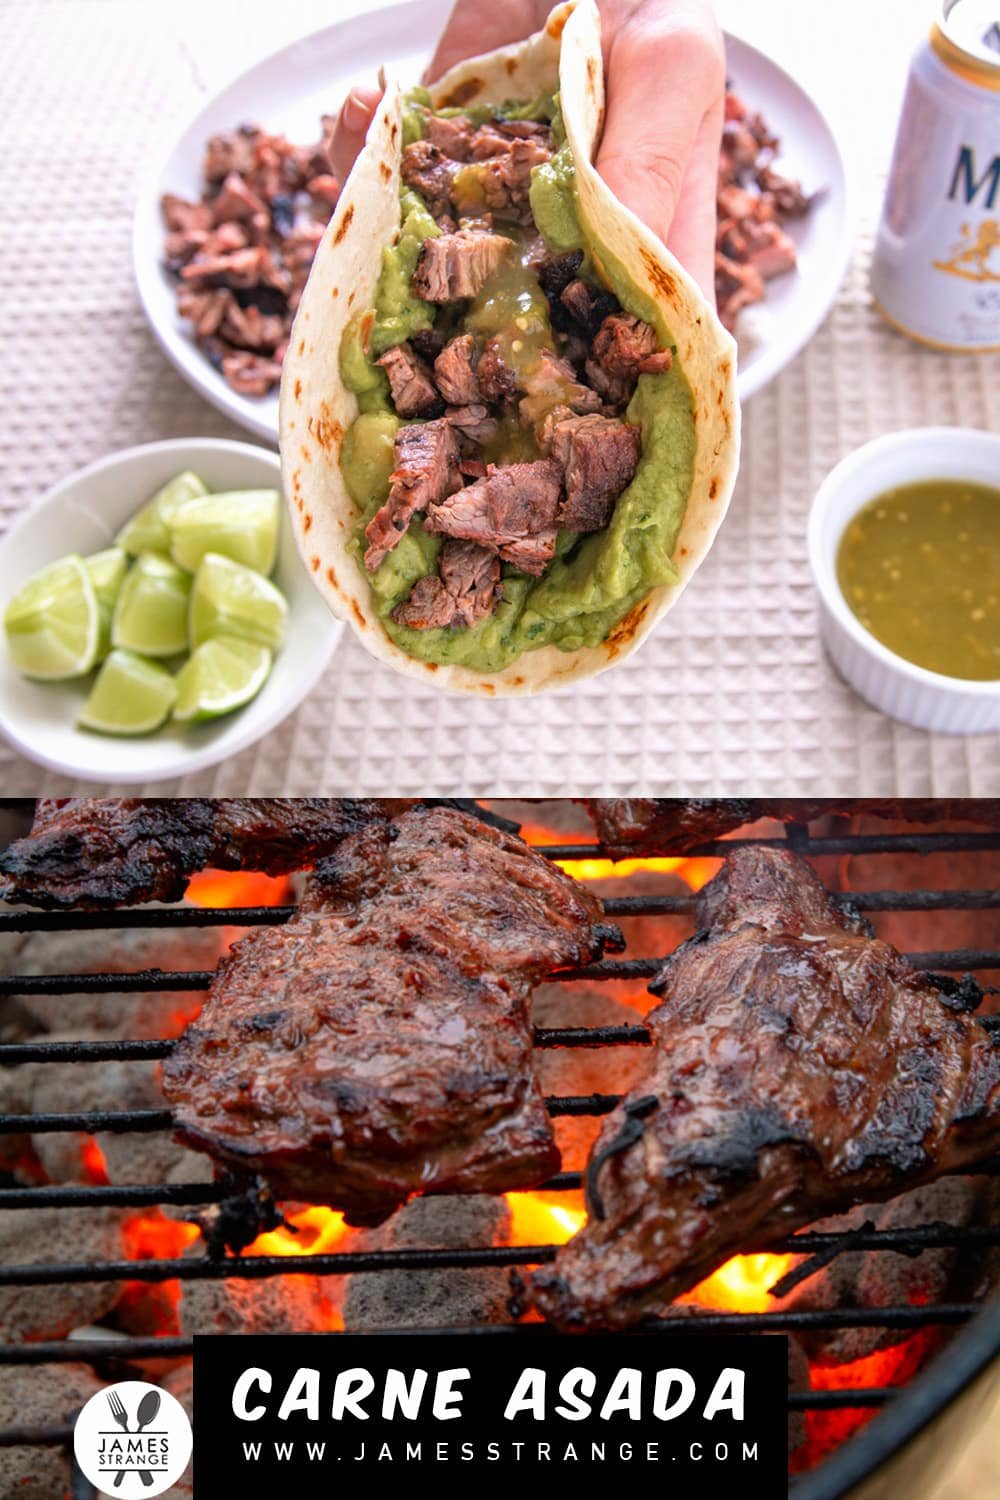 Top: A hand holding a carne asada taco with guacamole. Bottom: carne asada cooking on a grill. This is a pin for pinterest.